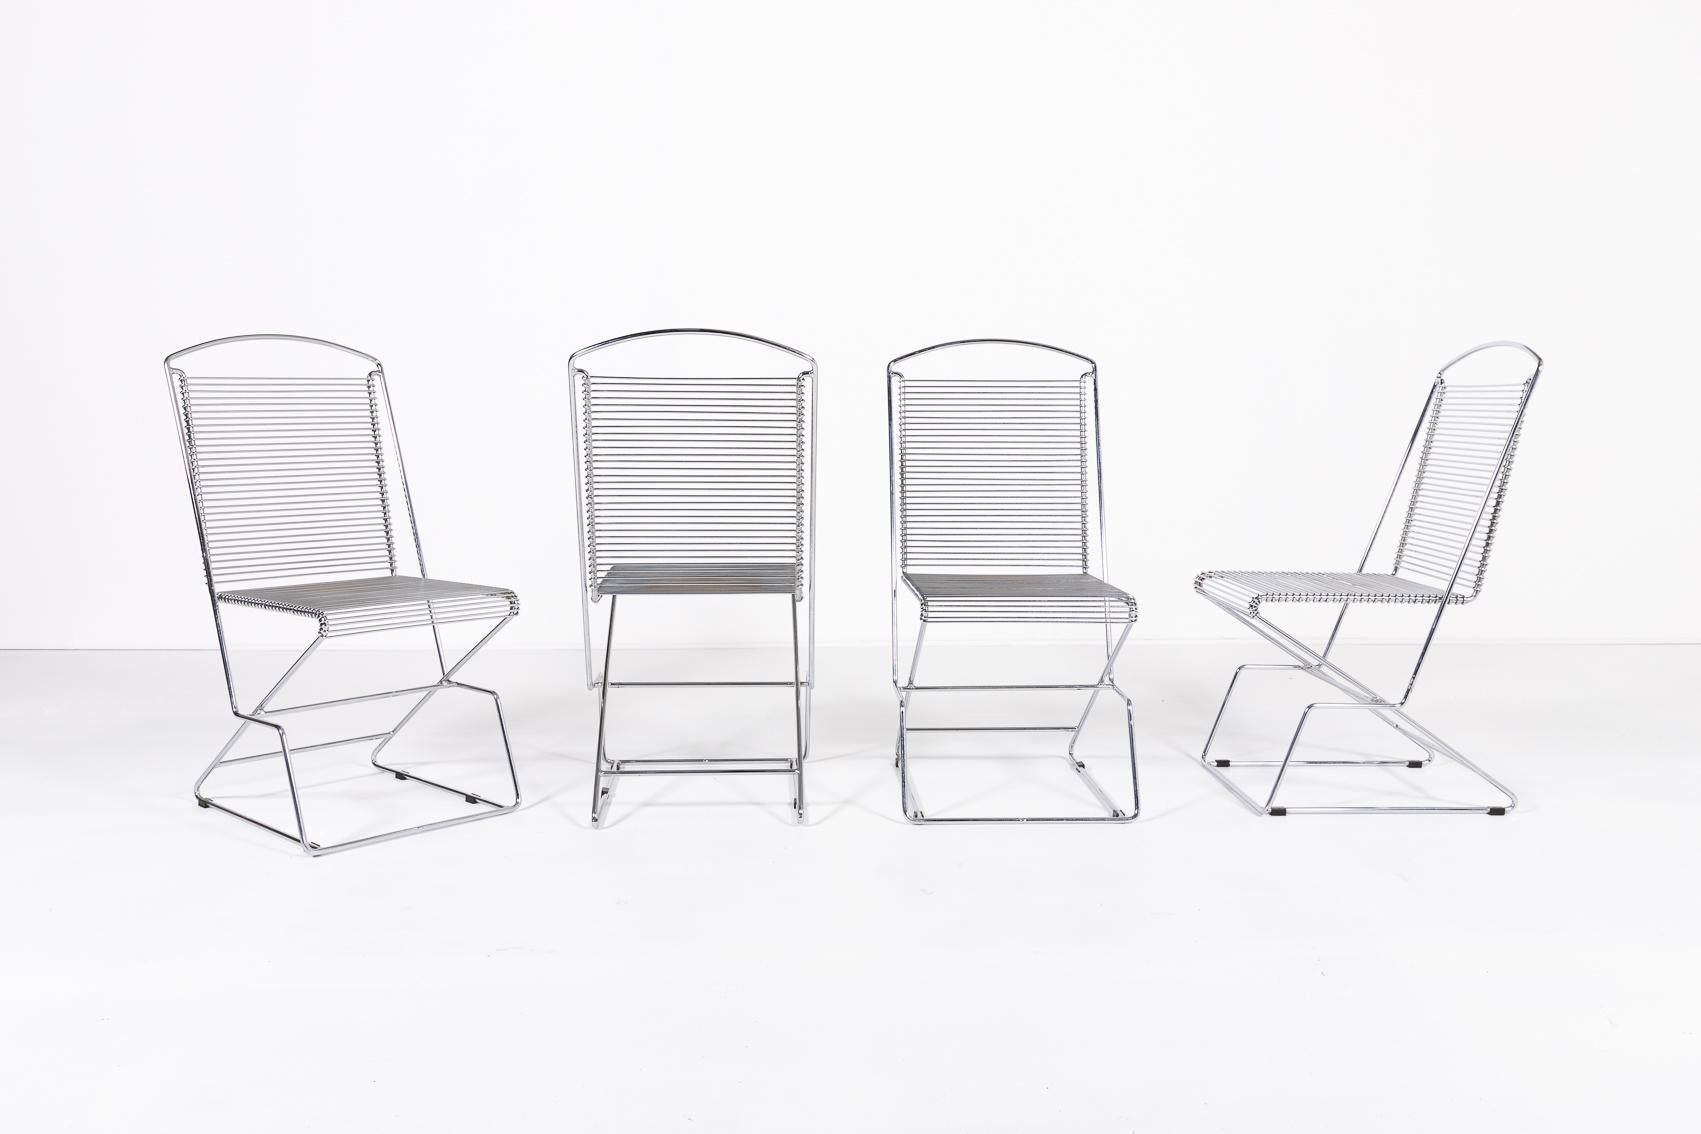 Spectacular design architectural steel wire chairs produced in the 1990s, Italy.

Condition
Good

Dimensions
height: 98 cm
width: 48 cm
seat height: 46 cm
depth: 55 cm